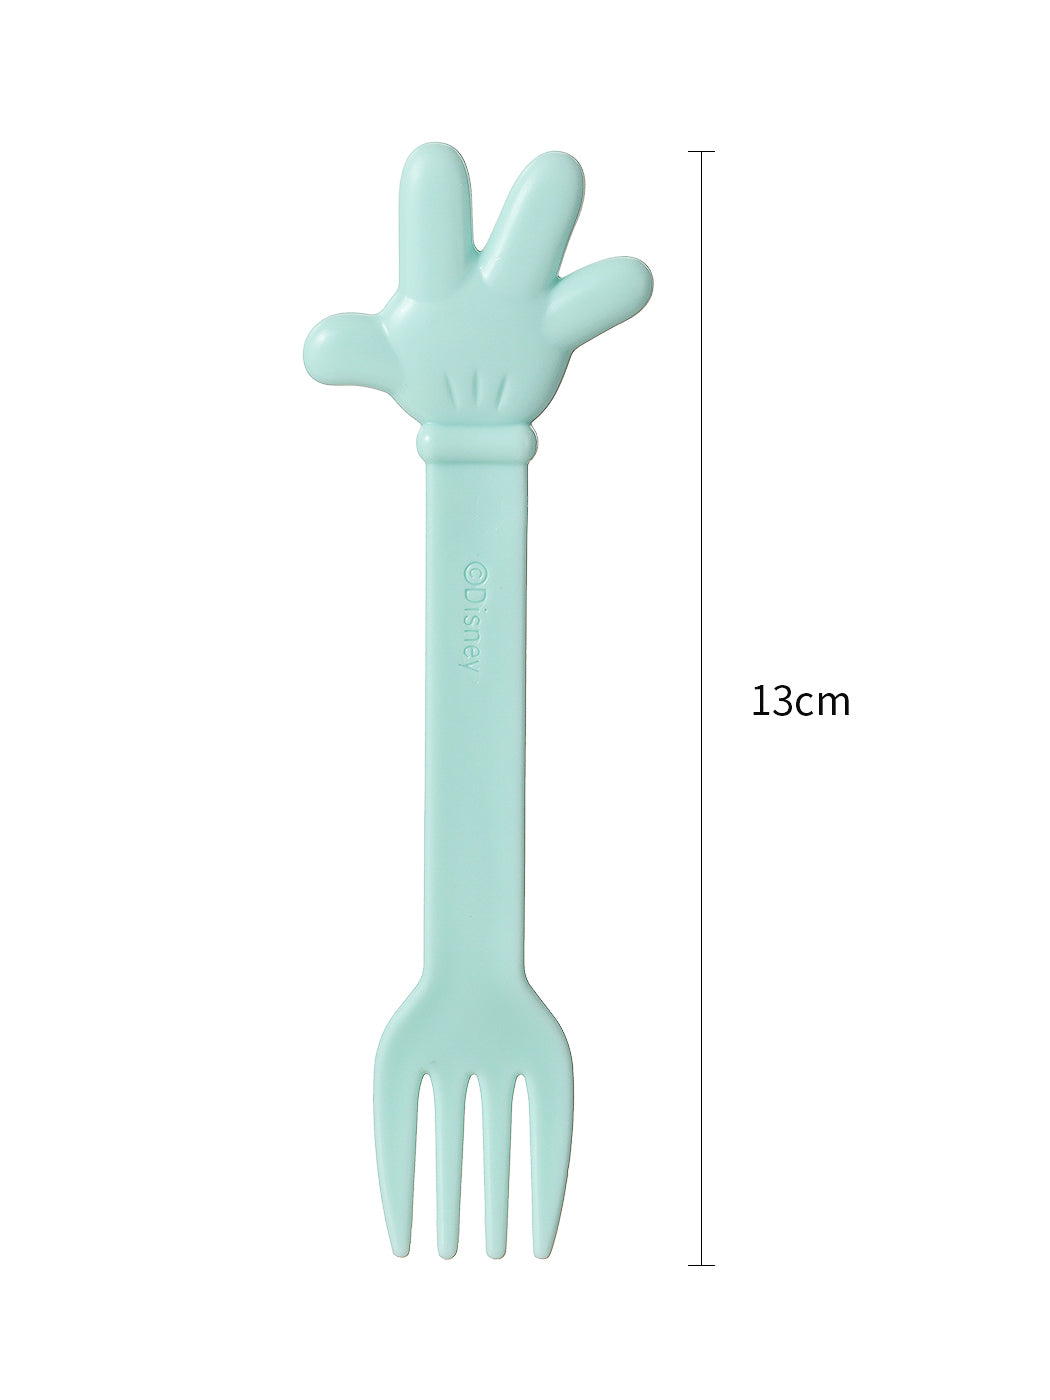 MINISO MICKEY MOUSE COLLECTION 2.0 FORK 8PCS(MICKEY MOUSE) 2010538310104 CUTLERY SET